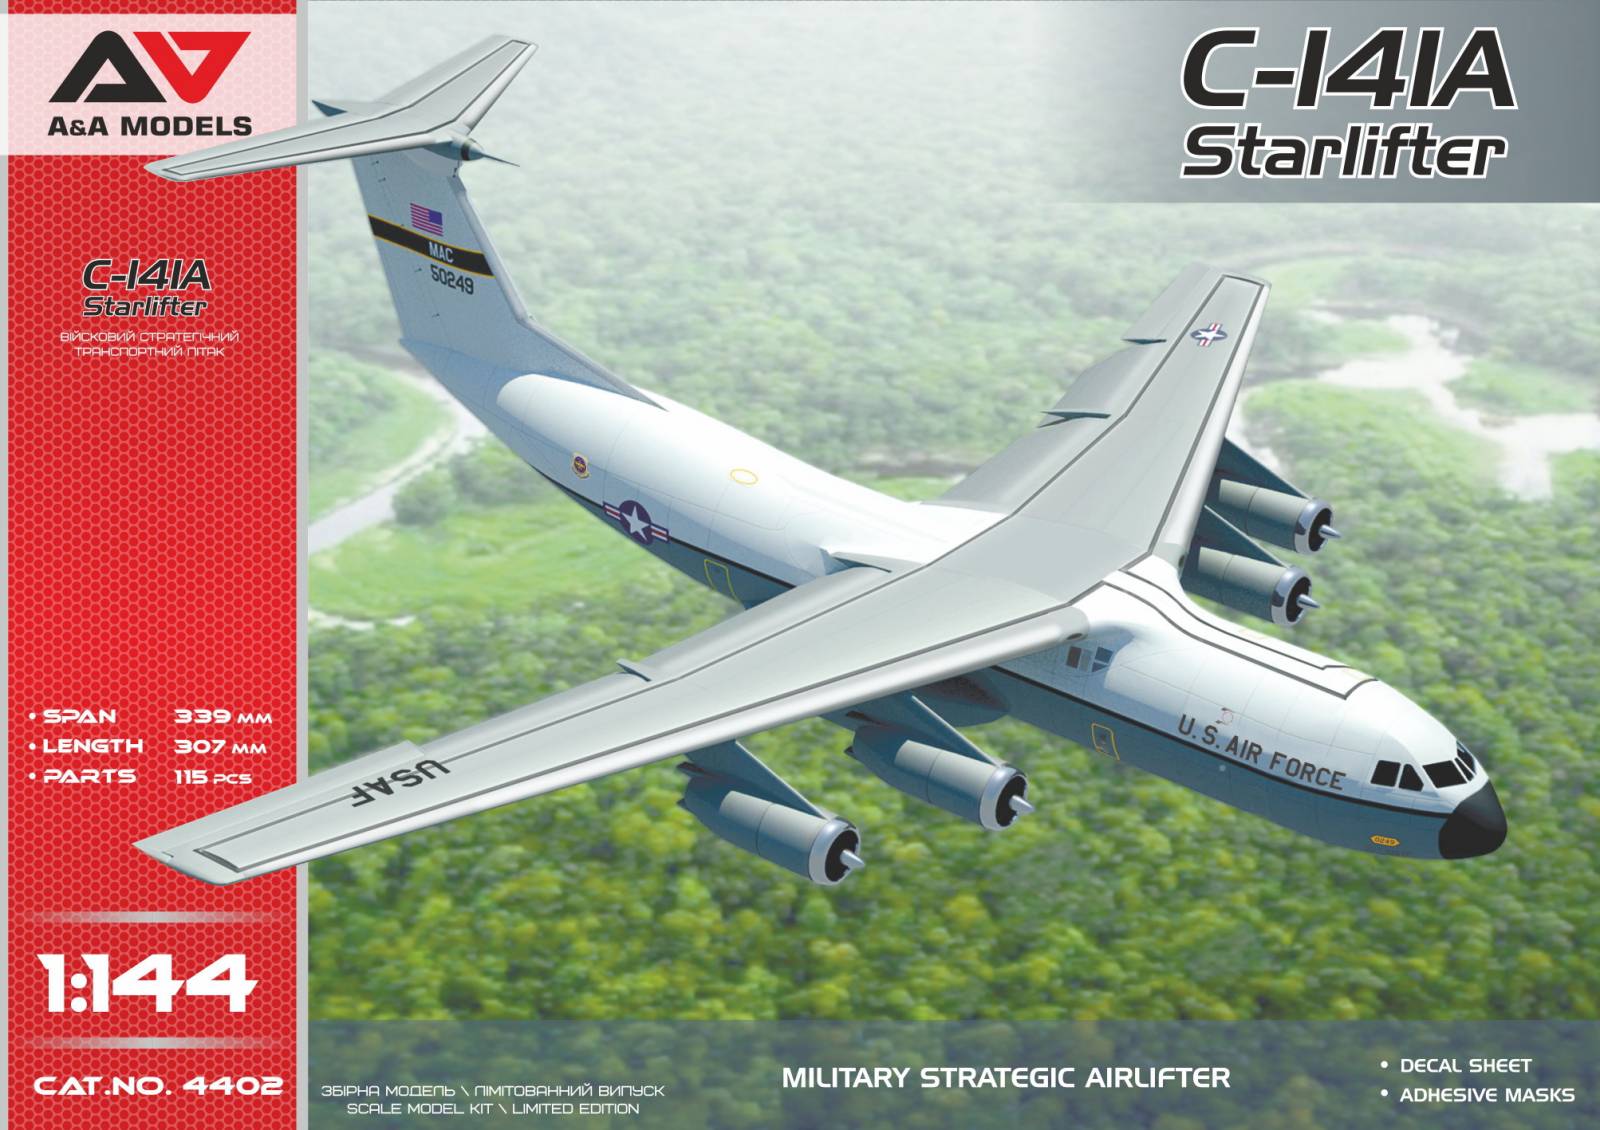 1/144 C-141A Strategic military airlifter ( 2 camo schemes)